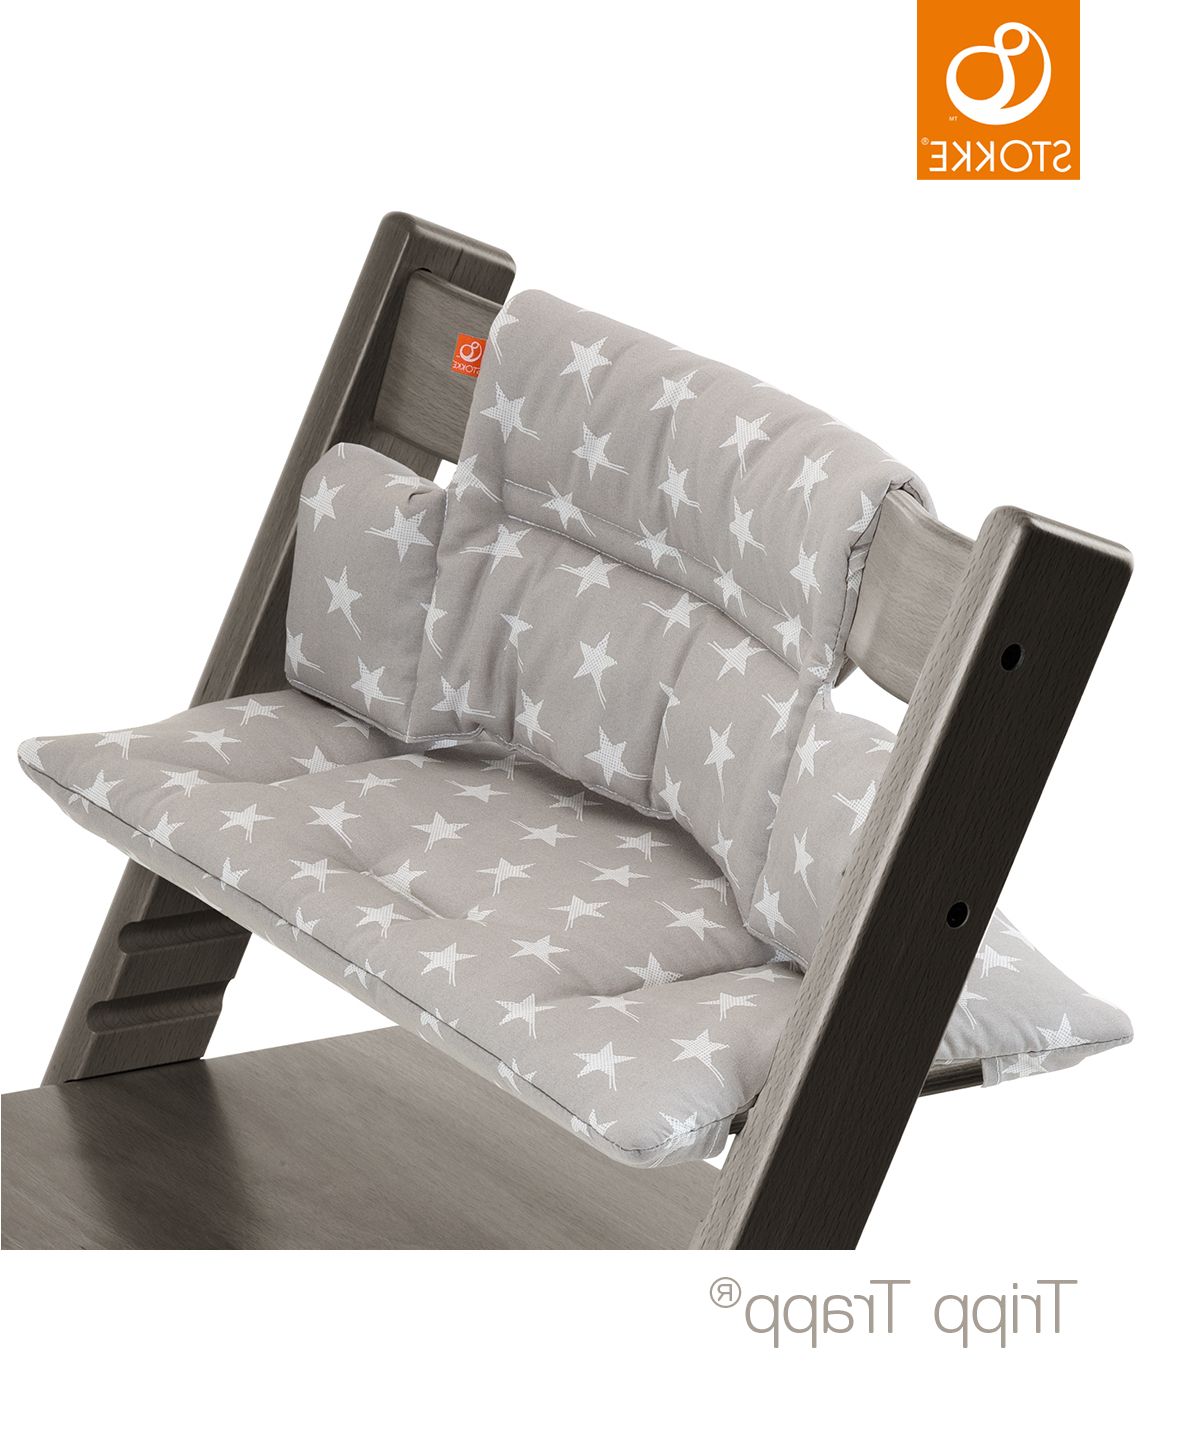 2020 Tripp Sofa With Cushions Within Stokke® Tripp Trapp® Classic Baby Cushion (View 11 of 20)